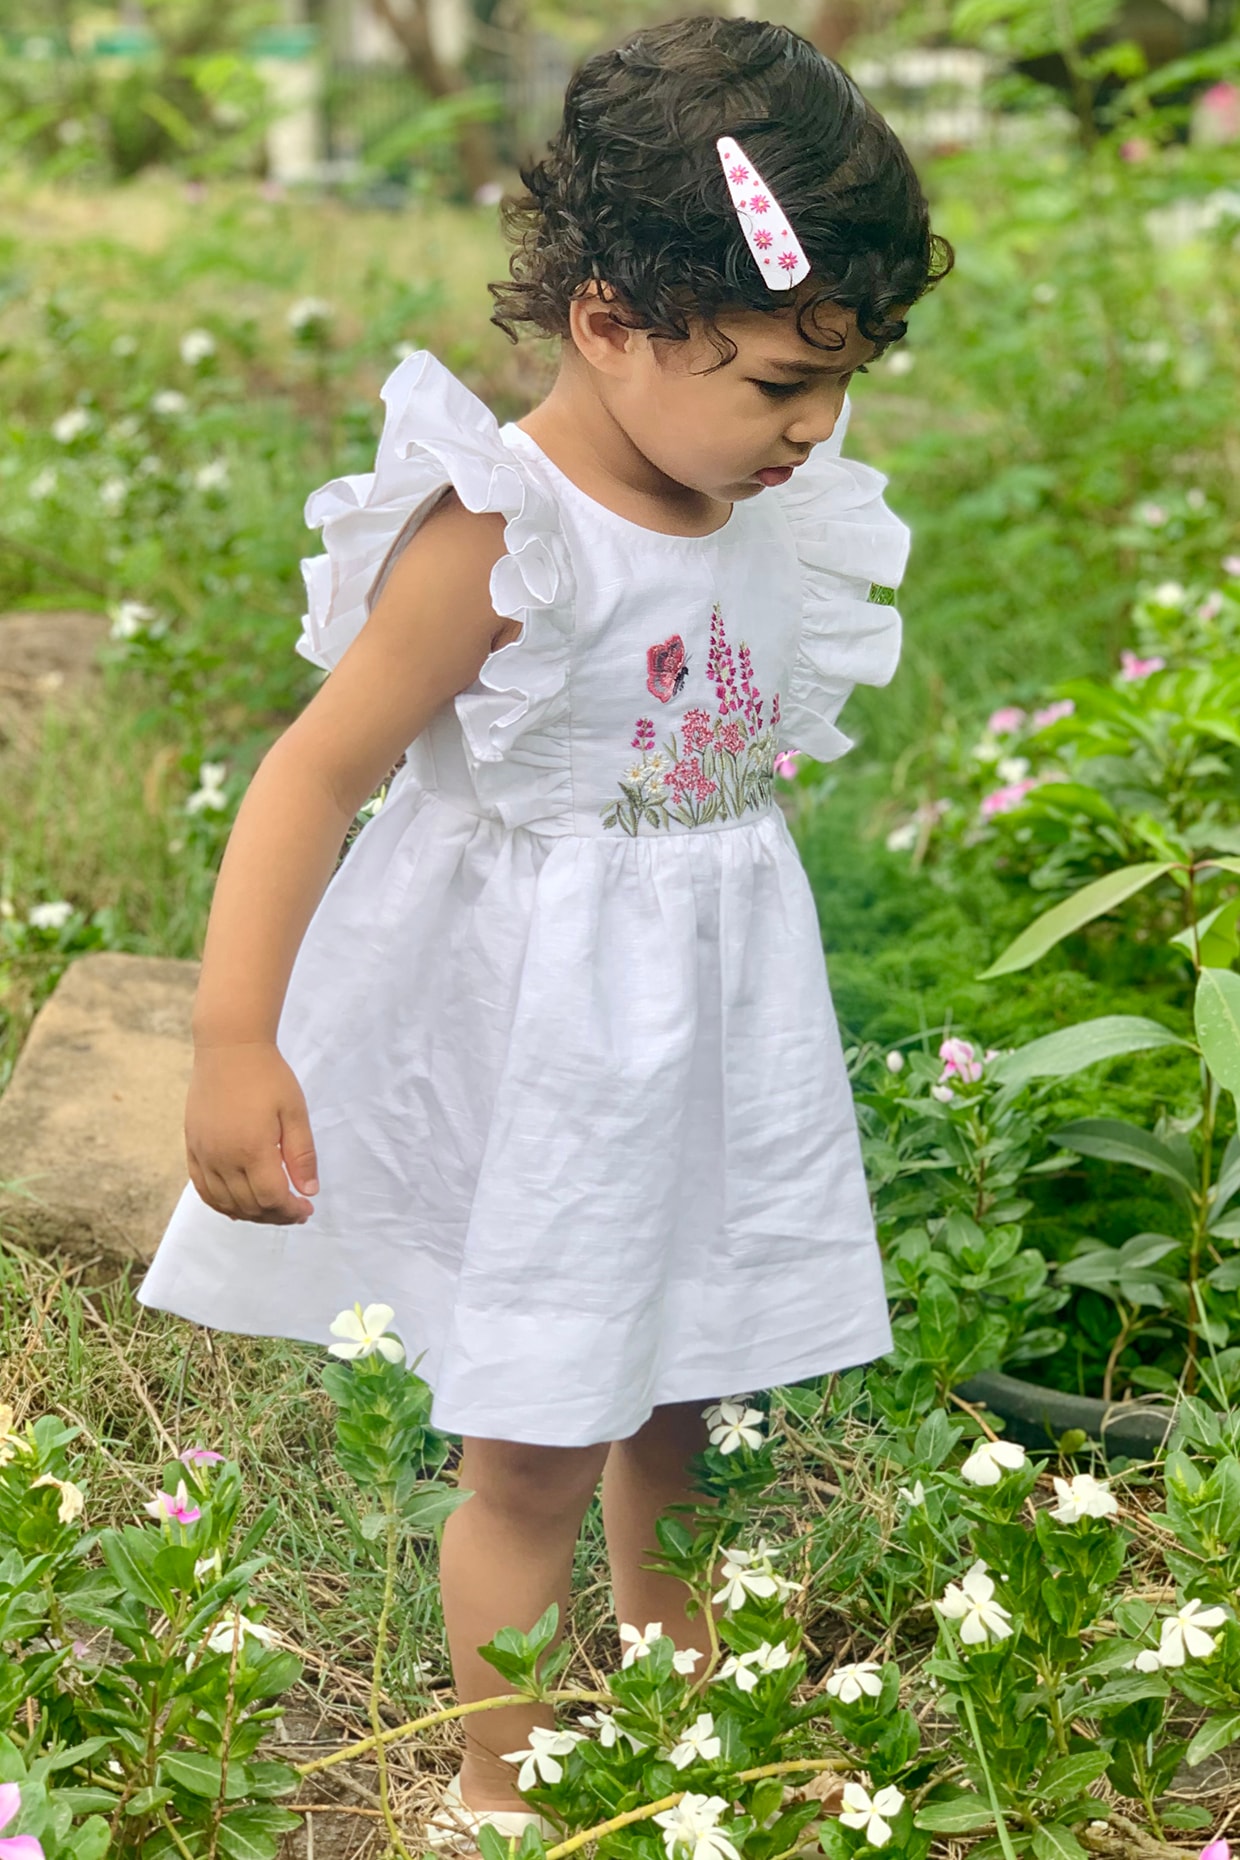 RG Collection Embellished, Self Design Baby Girls Dress (White, 2-3 Years)  : Amazon.in: Clothing & Accessories